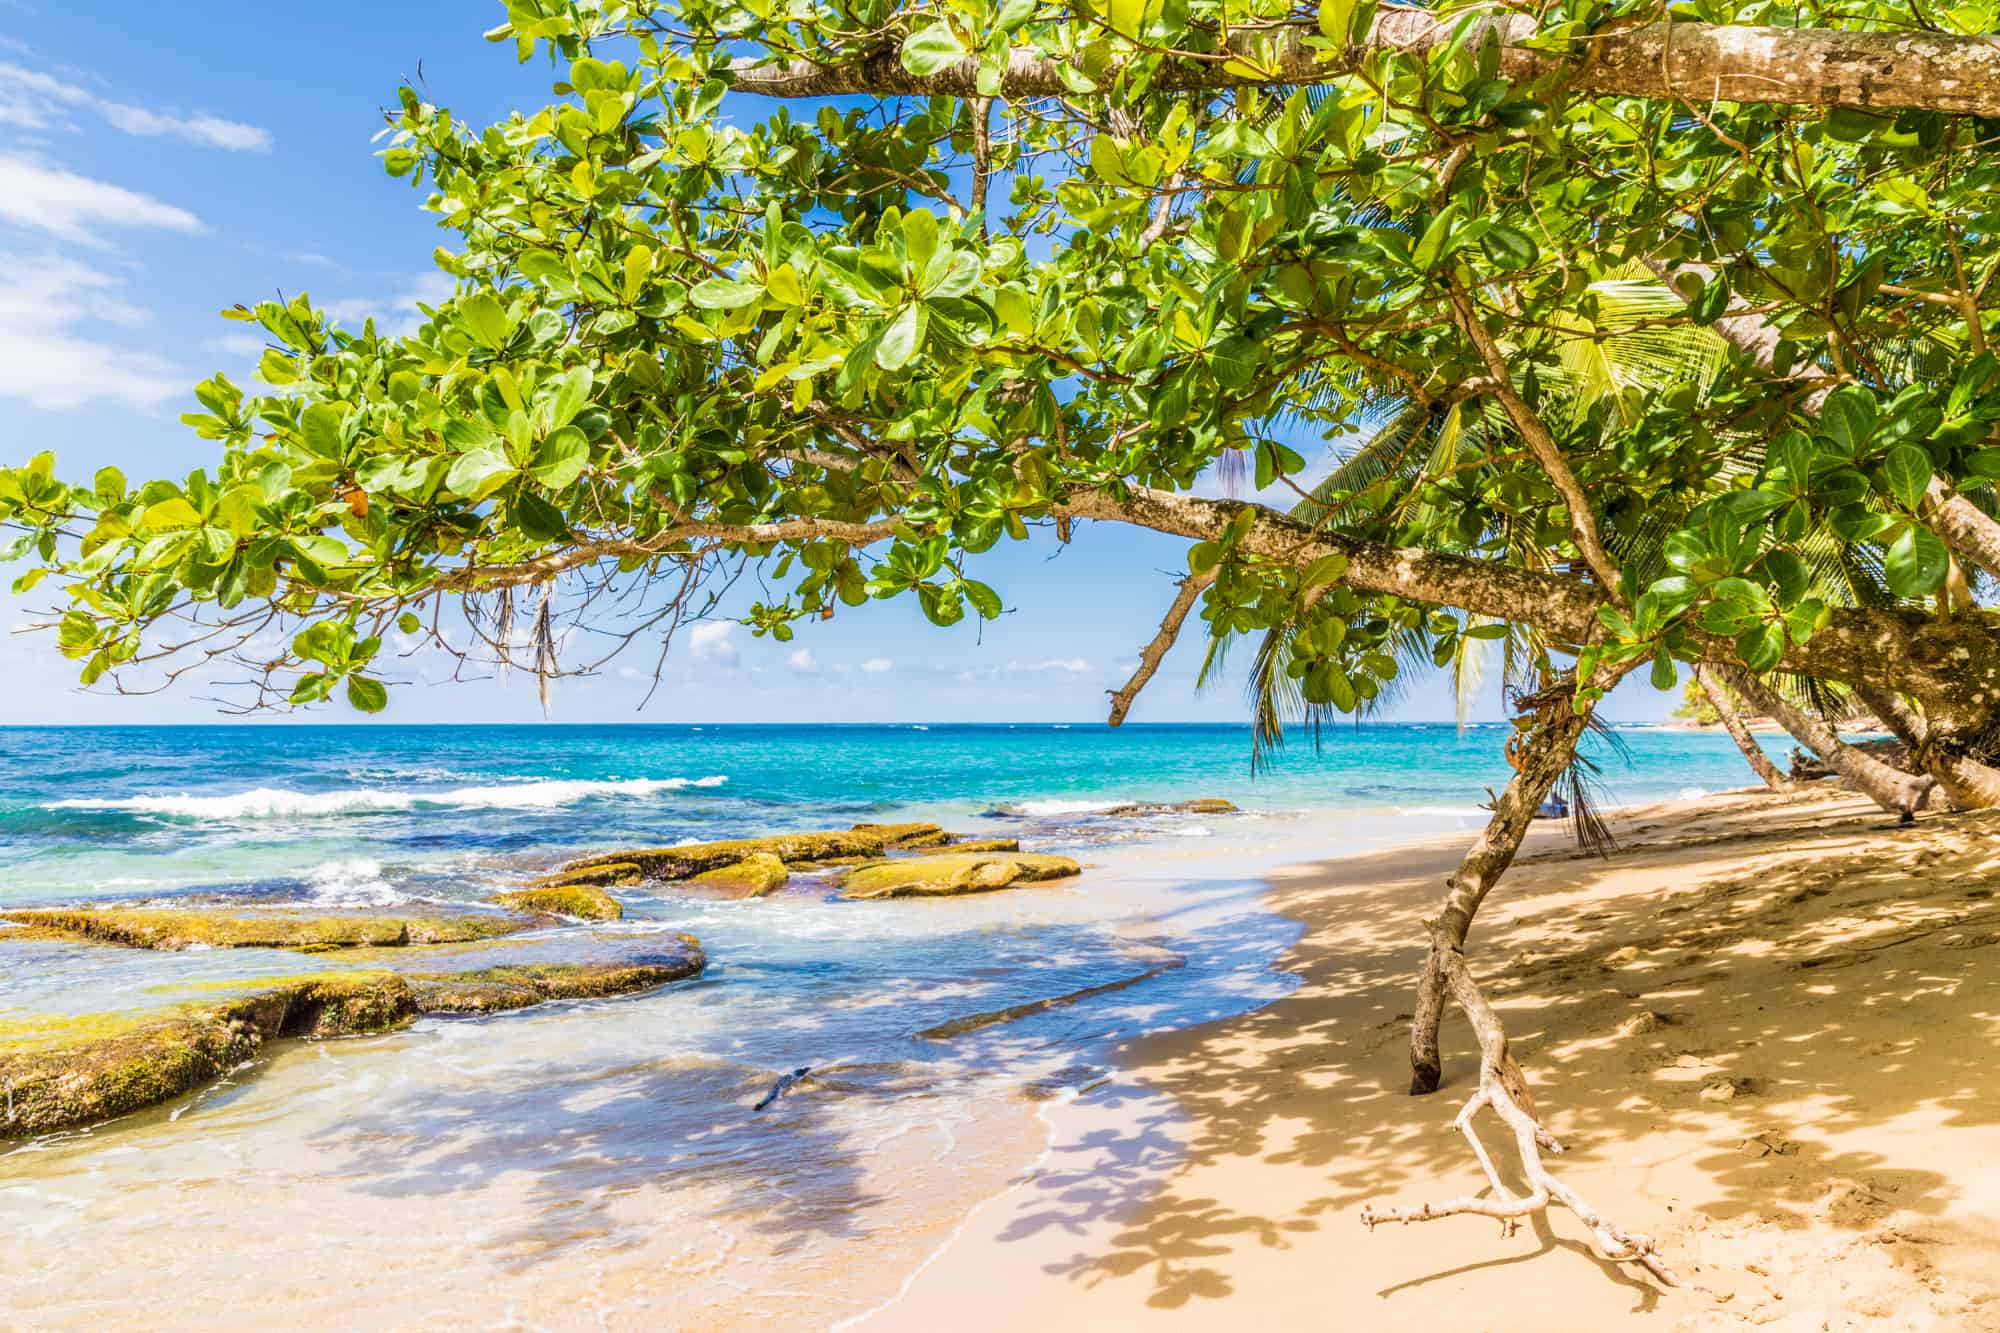 Costa Rica Beaches: Finding the Best Beaches in Costa Rica for Families